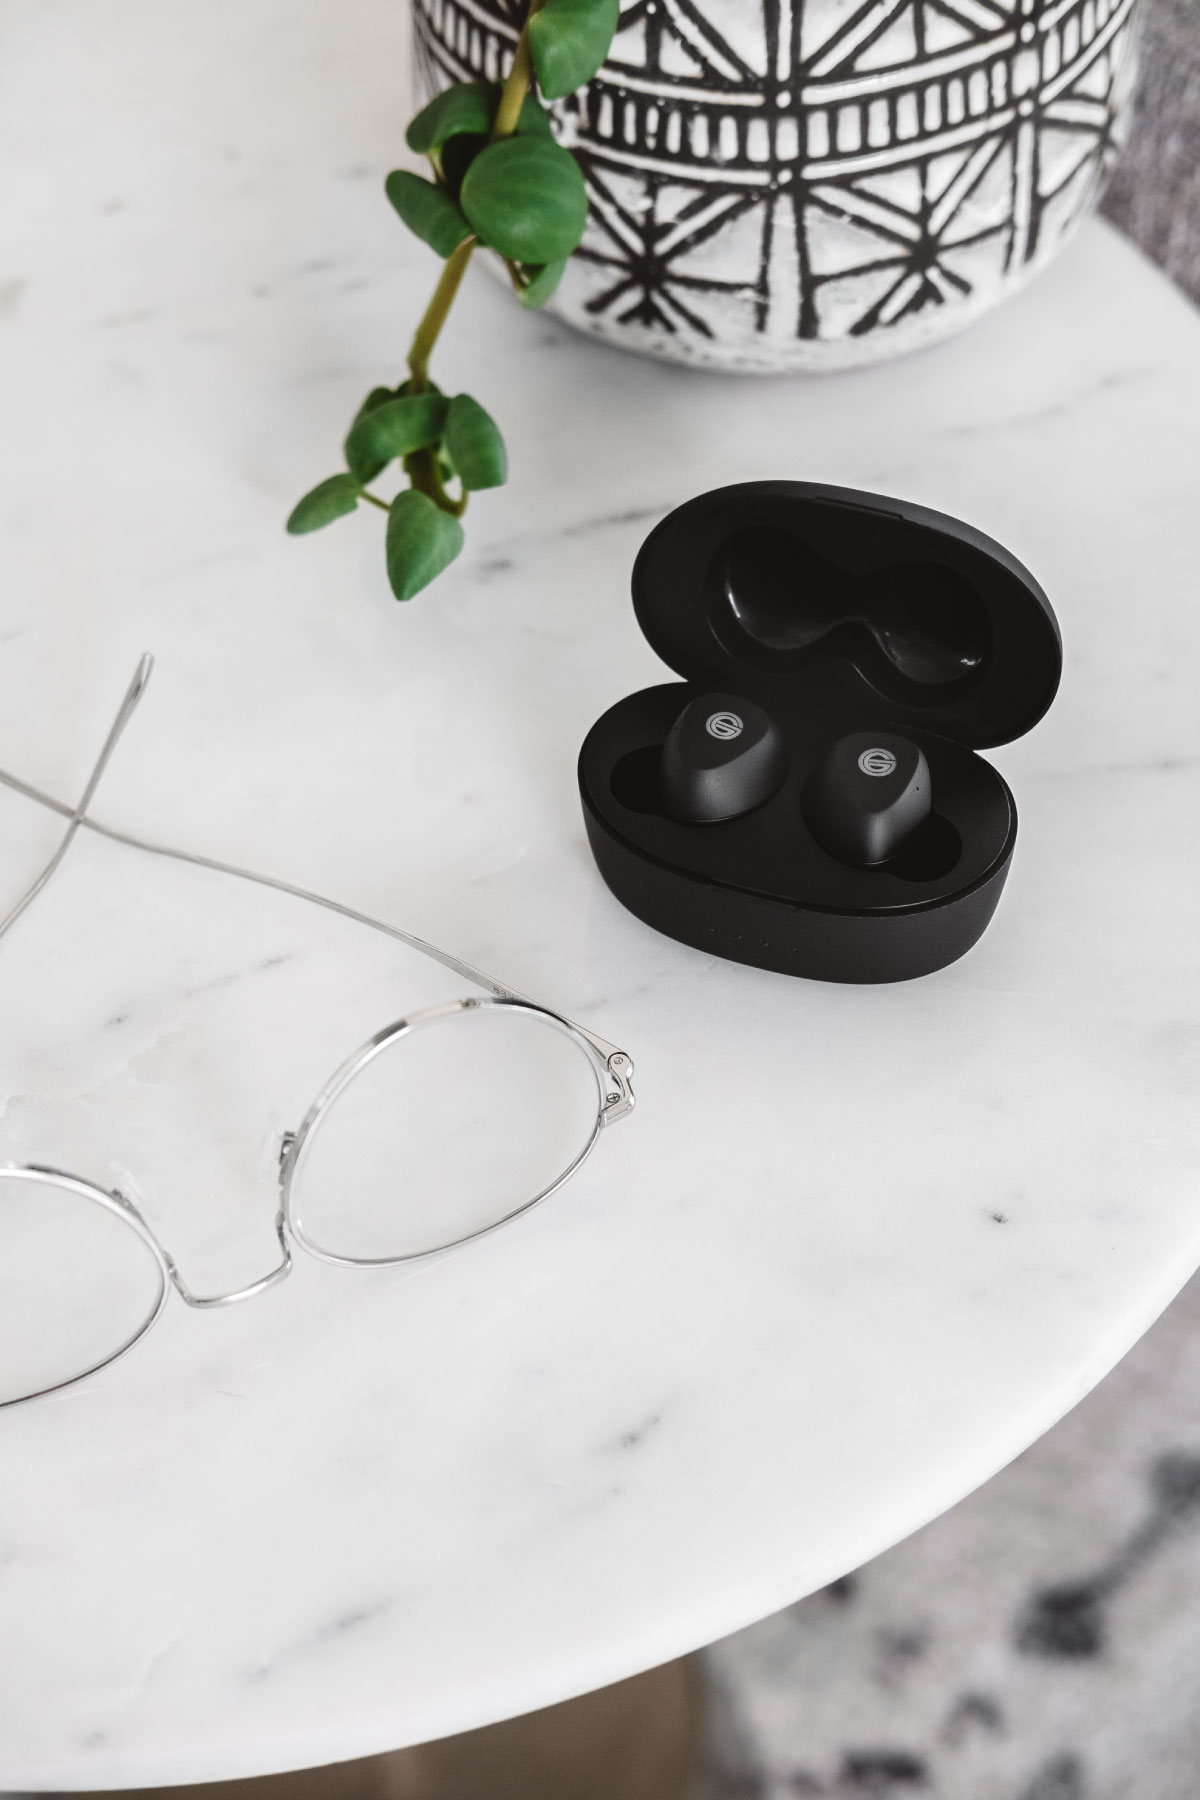 Photo of the GT220 headphones in their case on a white marble table next to a potted plant and glasses